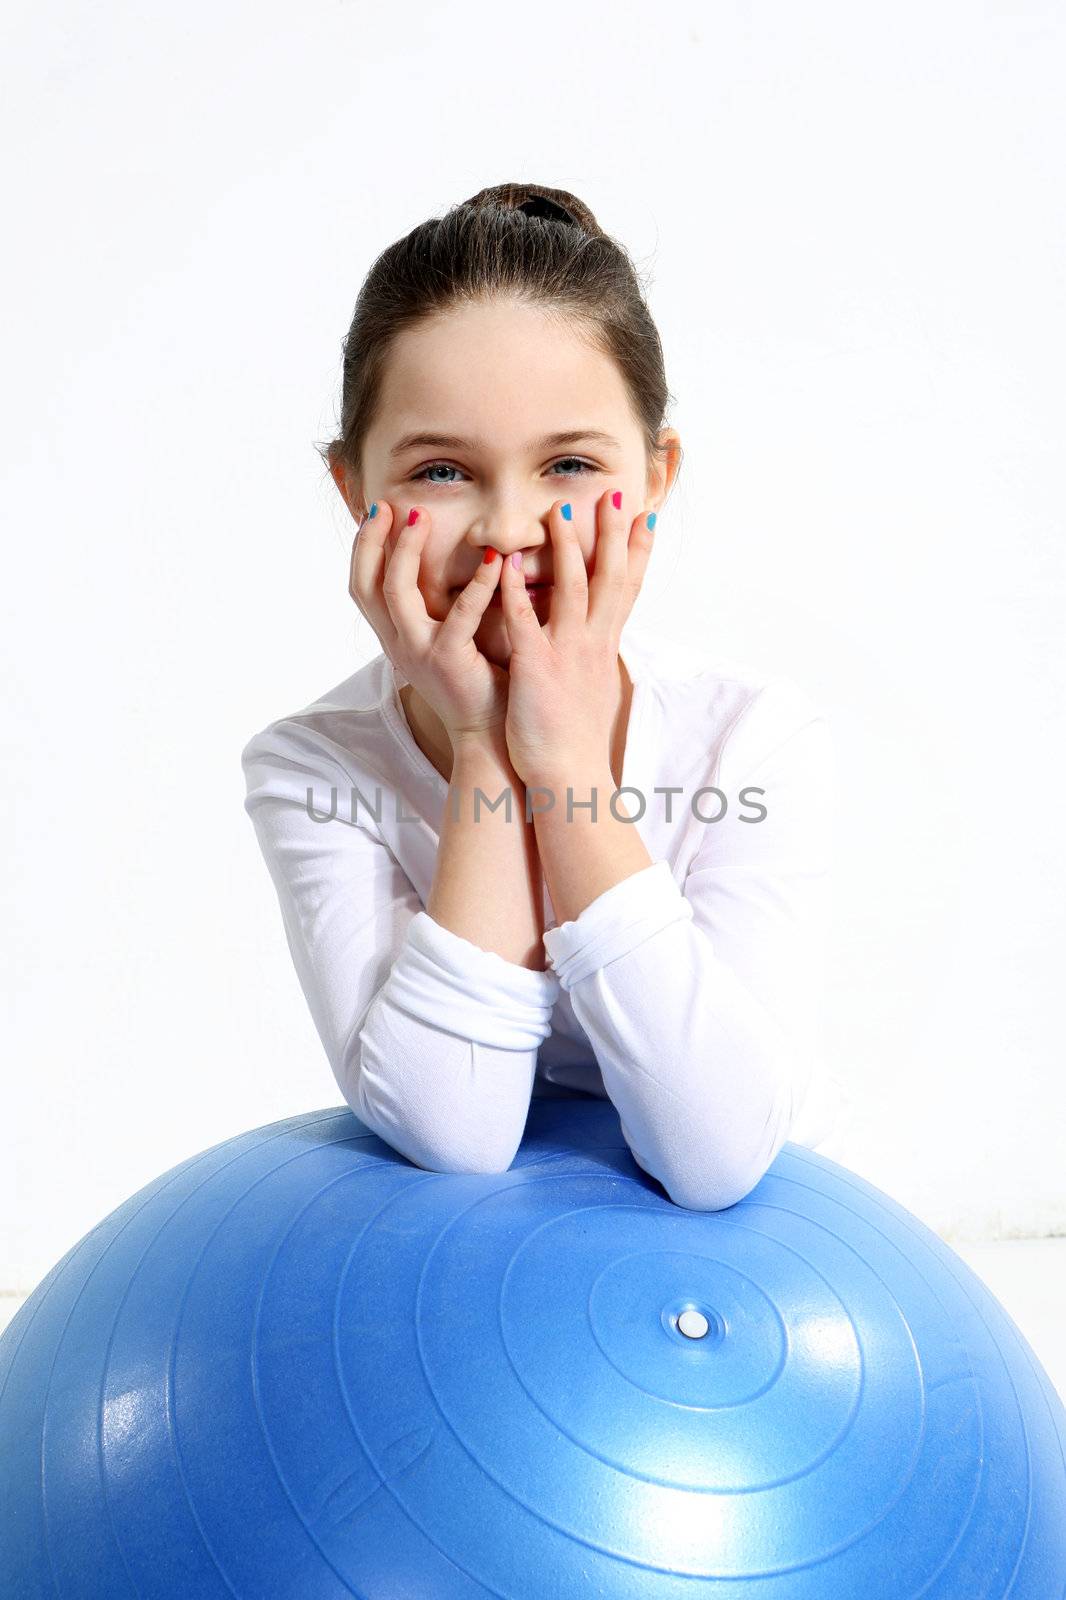 Portrait of little girl with a rubber ball by robert_przybysz